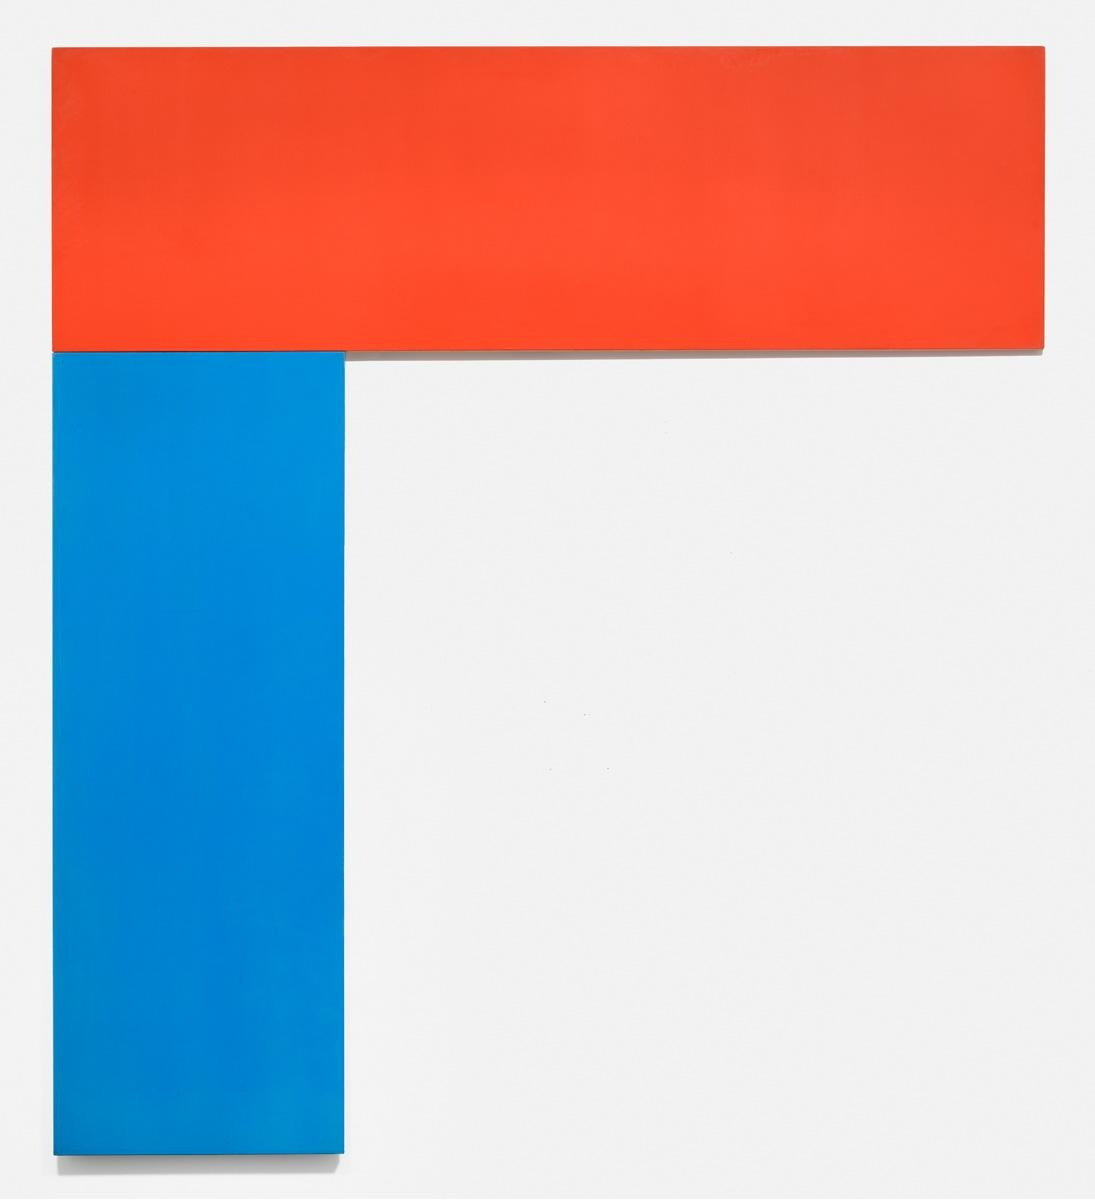 Ellsworth Kelly. Chatham VI: Red Blue. 1971 Oil on canvas, two joined panels The Museum of Modern Art, New York. Gift of Douglas S. Cramer Foundation